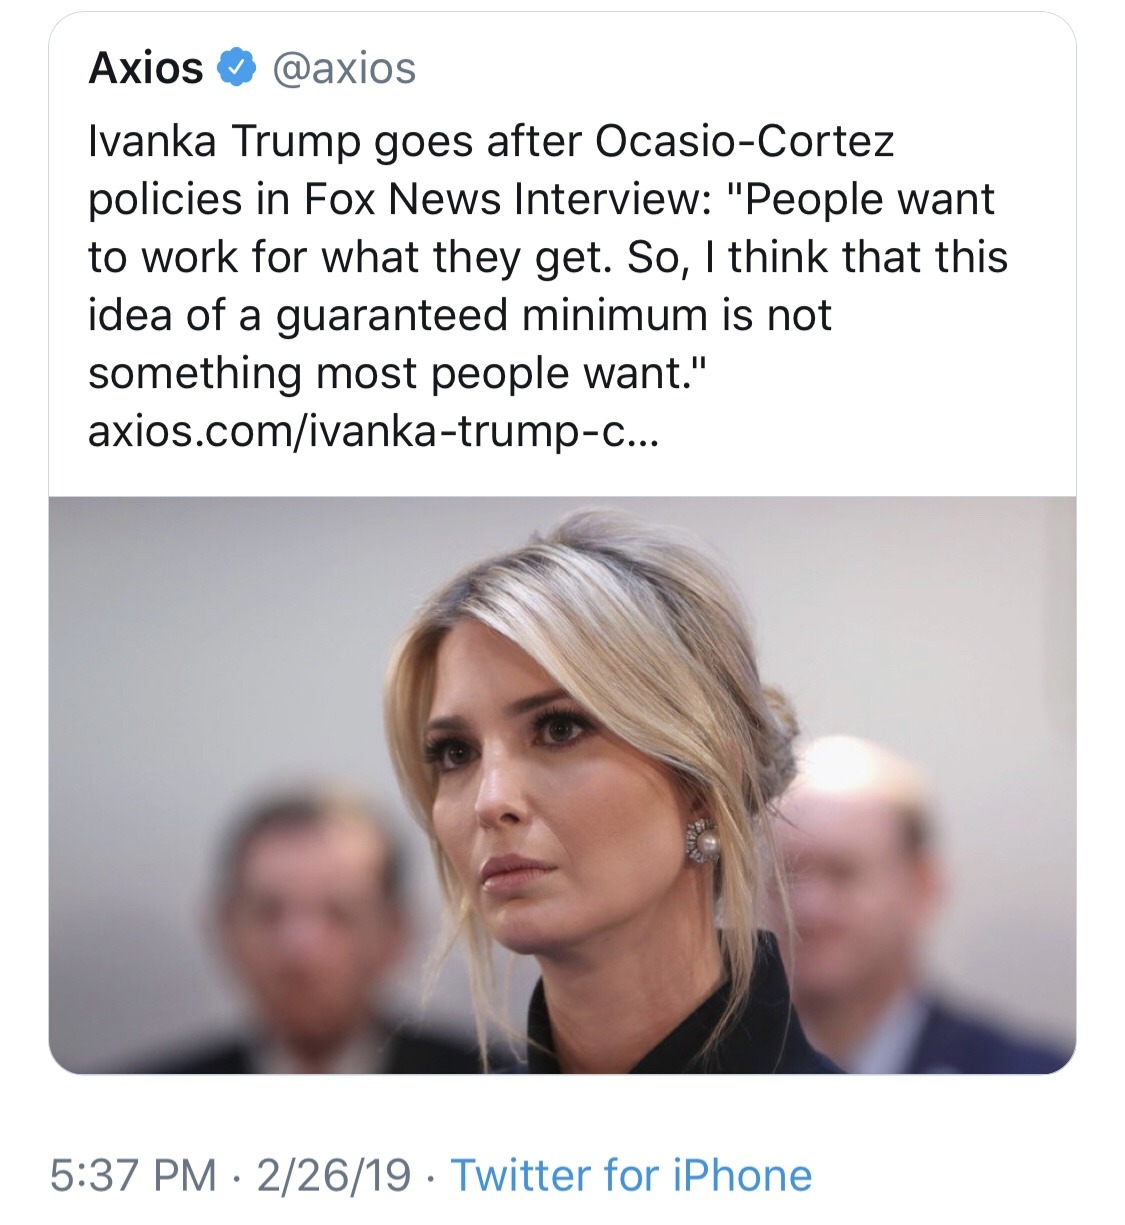 odinsblog:  Ivanka Trump, a trust fund baby who has never done an honest day’s work, is trying to lecture Alexandria Ocasio-Cortez? About income inequality and living wages??? Seriously?  Ivanka is pushing the old Republican canard that “poor people